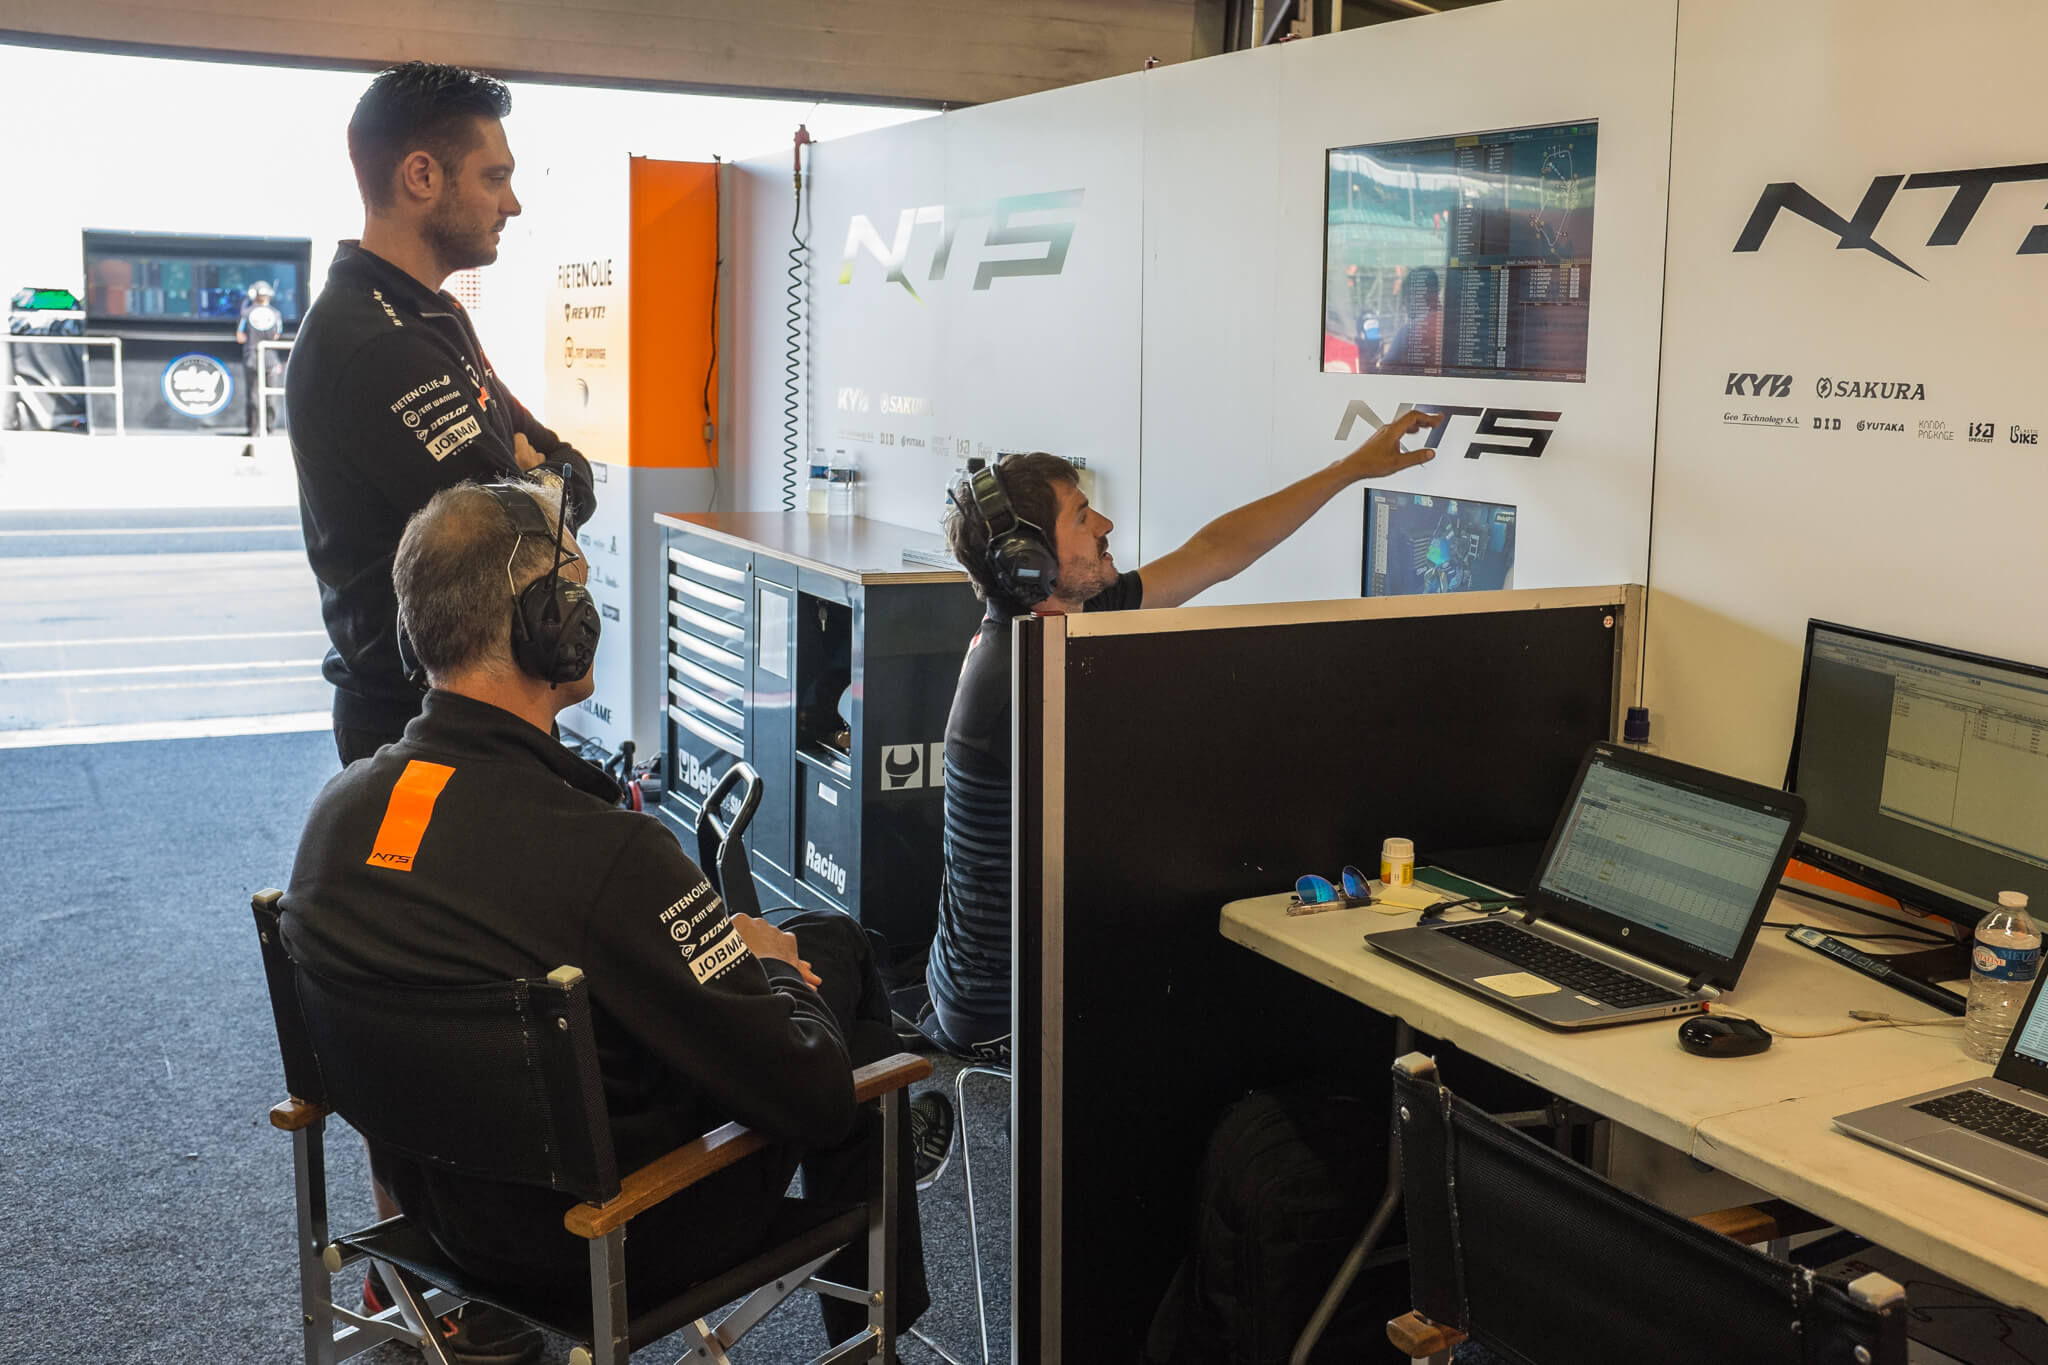 Analysing the data and lap time